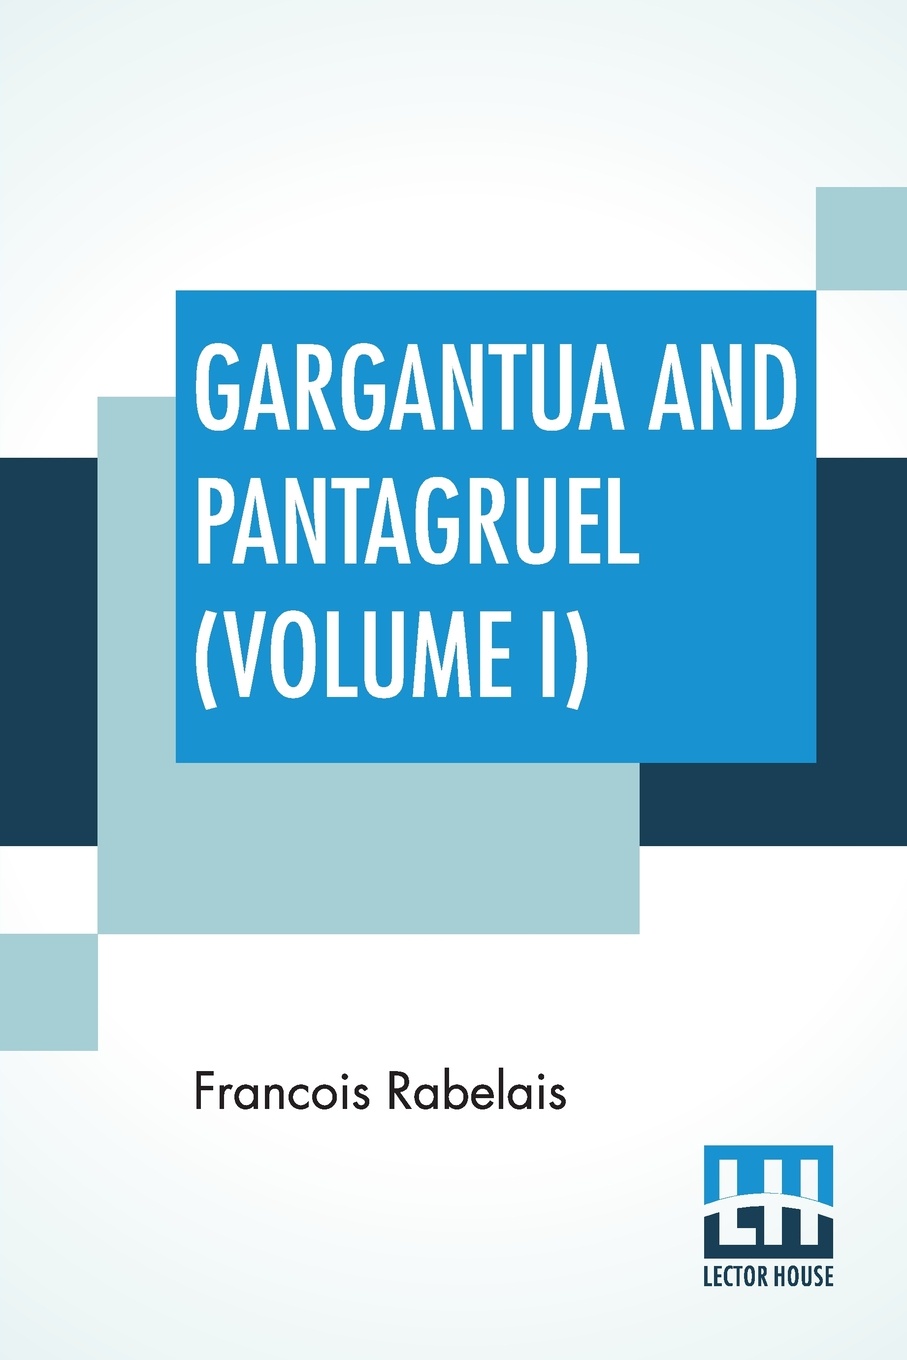 Gargantua And Pantagruel (Volume I). Five Books Of The Lives, Heroic Deeds And Sayings Of Gargantua And His Son Pantagruel, Translated Into English By Sir Thomas Urquhart Of Cromarty And Peter Antony Motteux